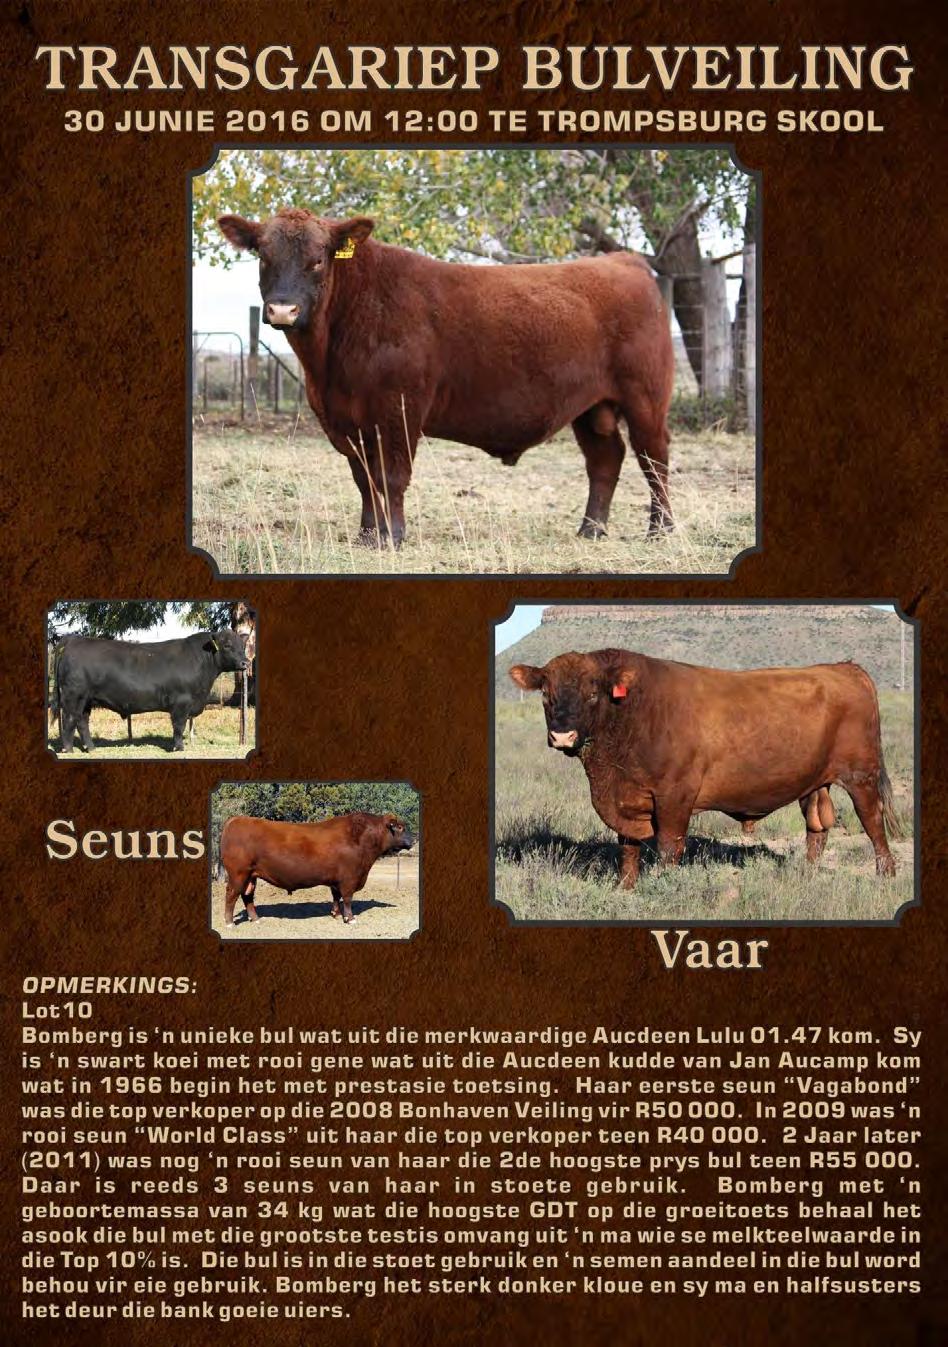 AUCDEEN GENETICS DOING WELL ELSEWHERE. Bomberg sold for R50,000 at the TRANSGARIEP SALE!